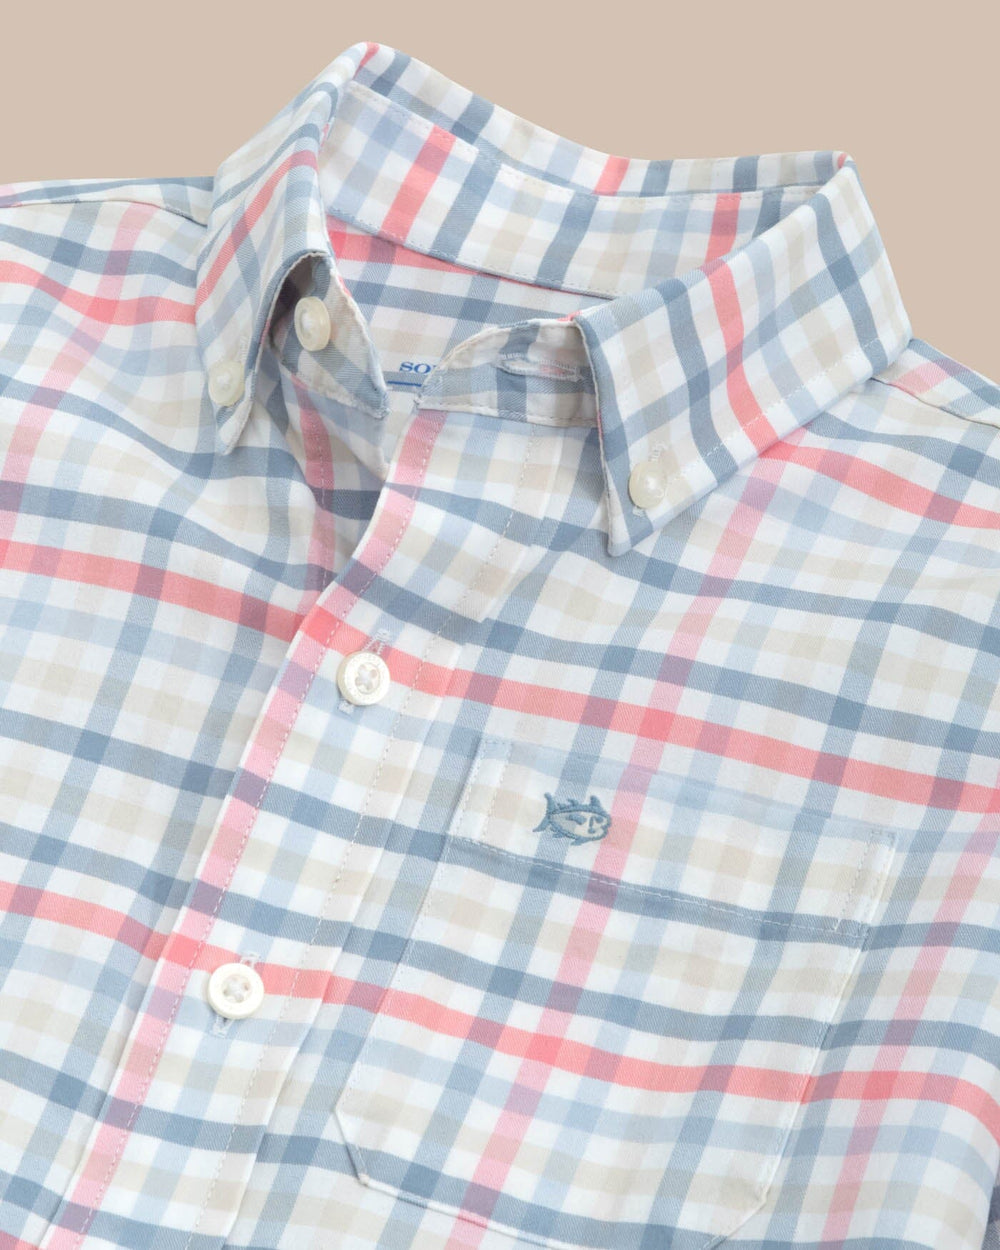 The detail view of the Southern Tide youth-coastal-passage-pelham-plaid-long-sleeve-sportshirt by Southern Tide - Geranium Pink